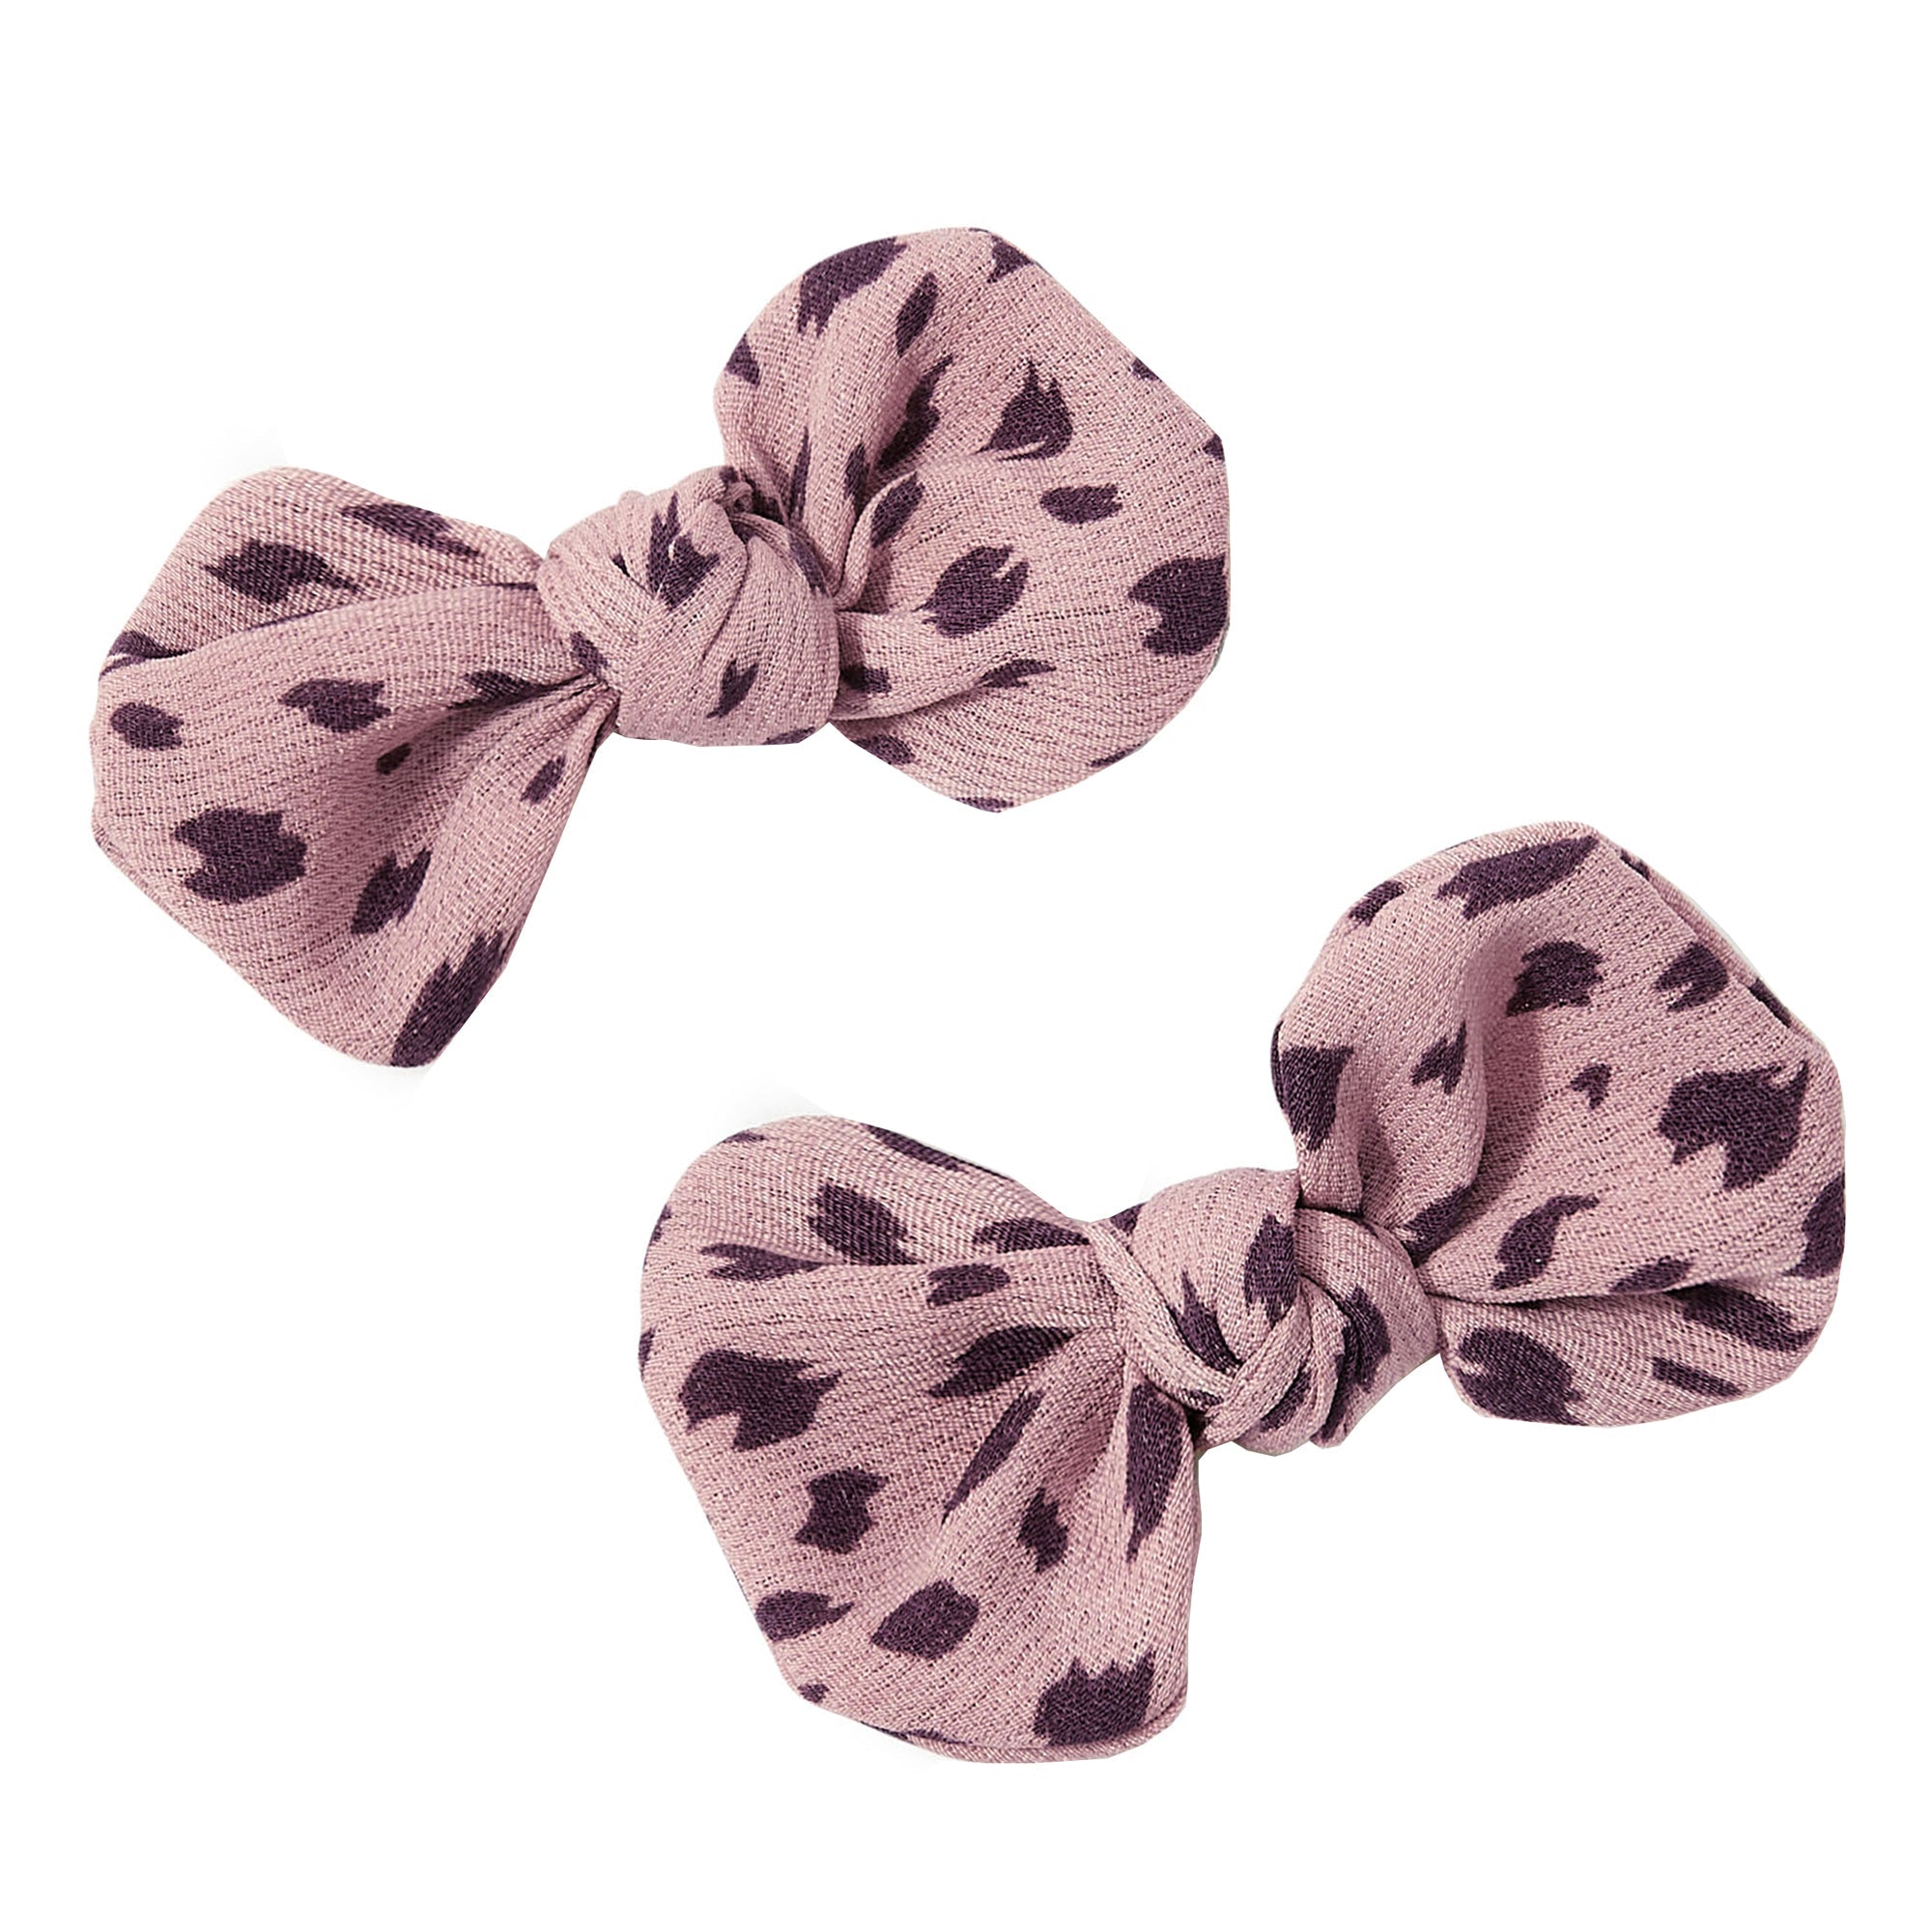 Accessorize London Girl's Spotty Hair Alice Band And Clip Set